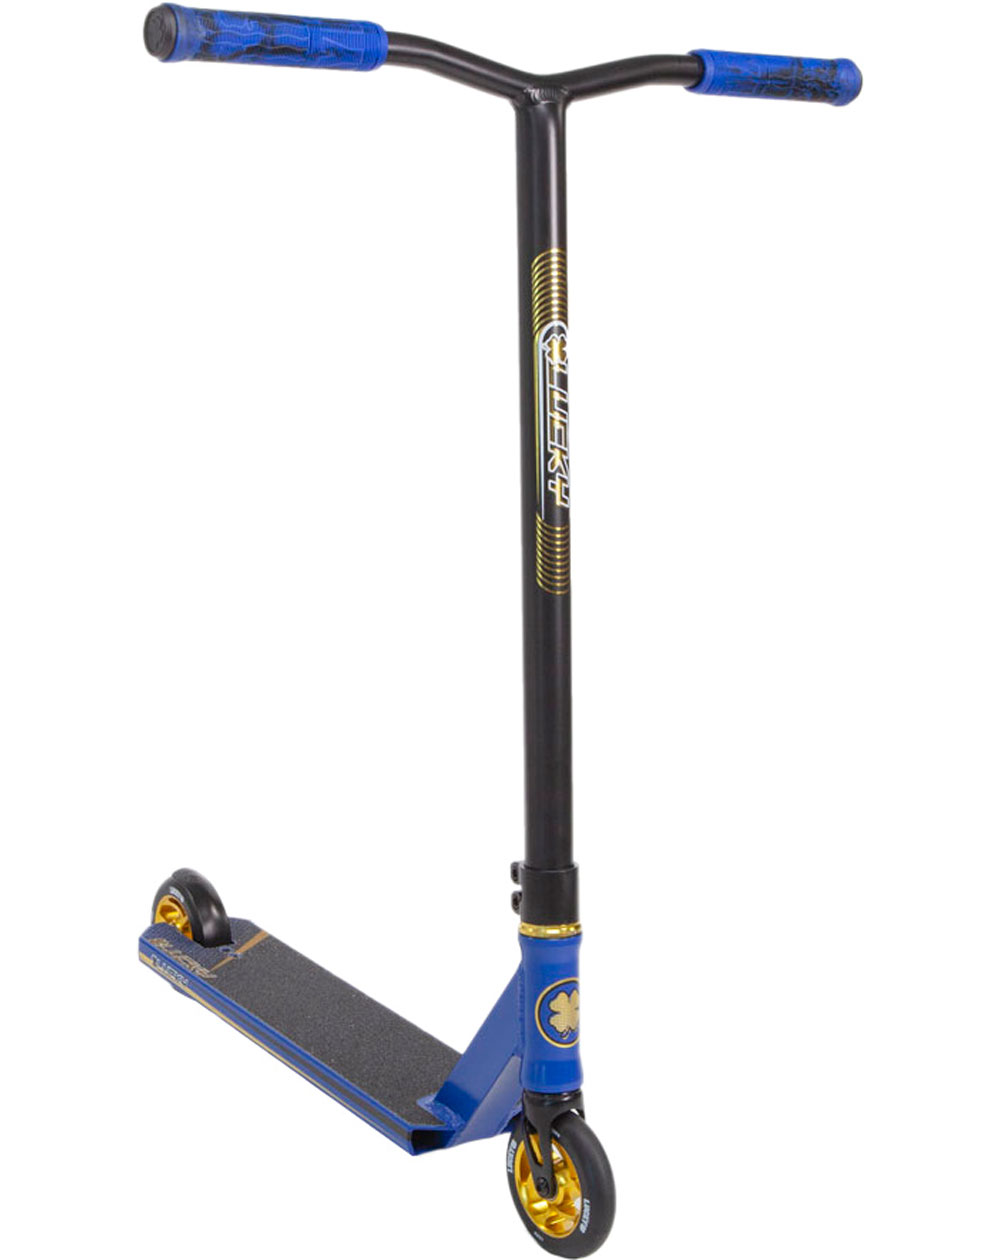 Lucky Crew 2021 Stuntscooter Blue Royale